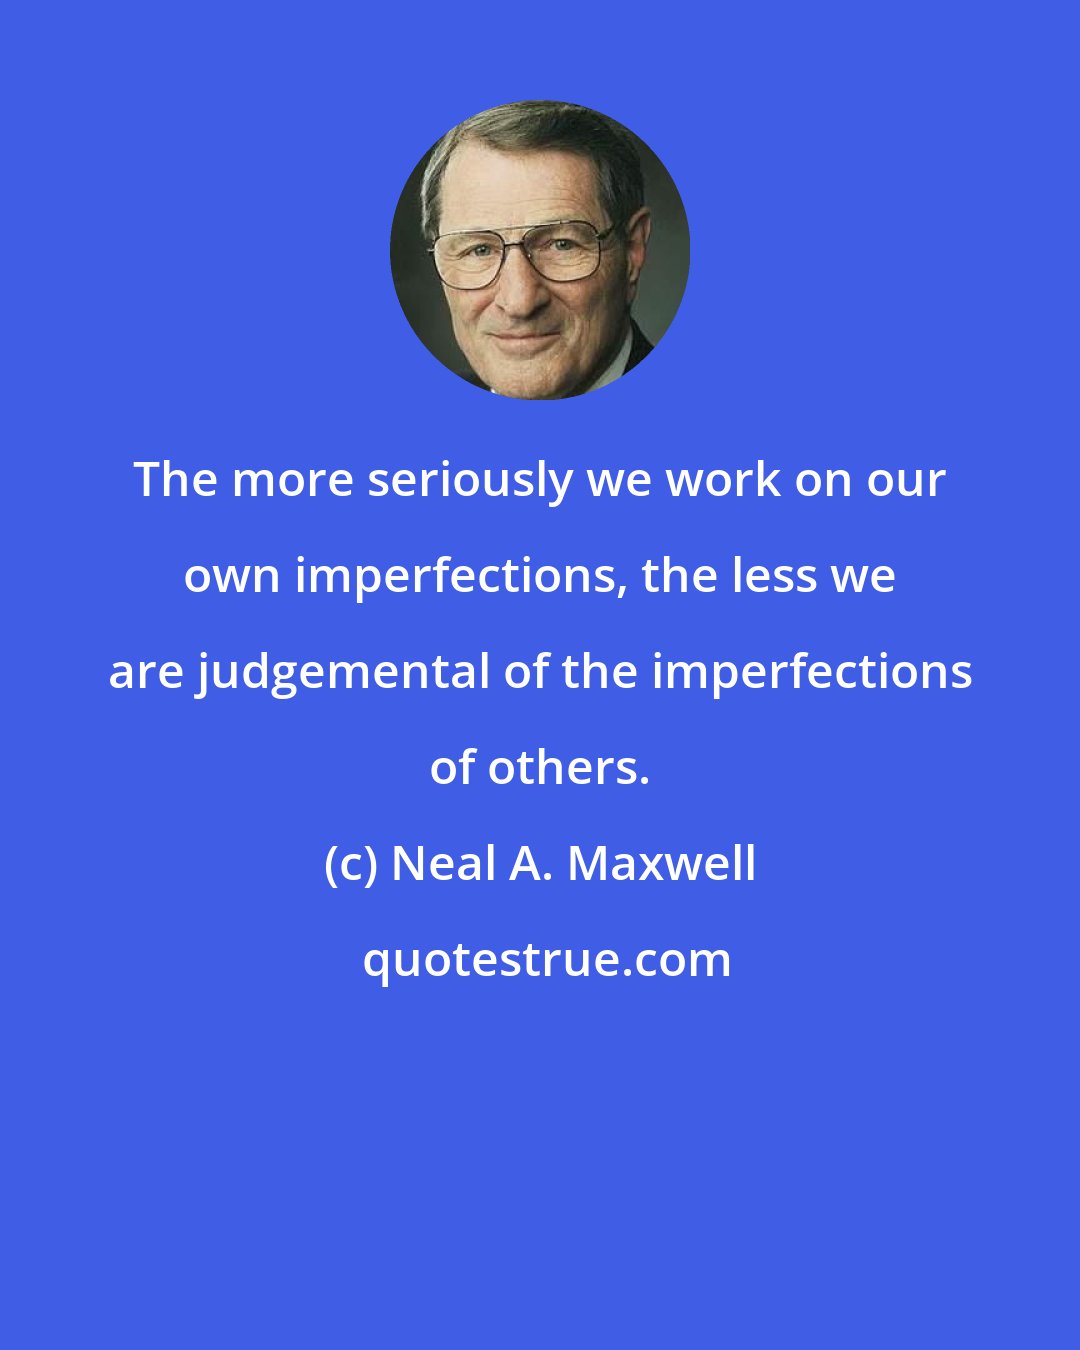 Neal A. Maxwell: The more seriously we work on our own imperfections, the less we are judgemental of the imperfections of others.